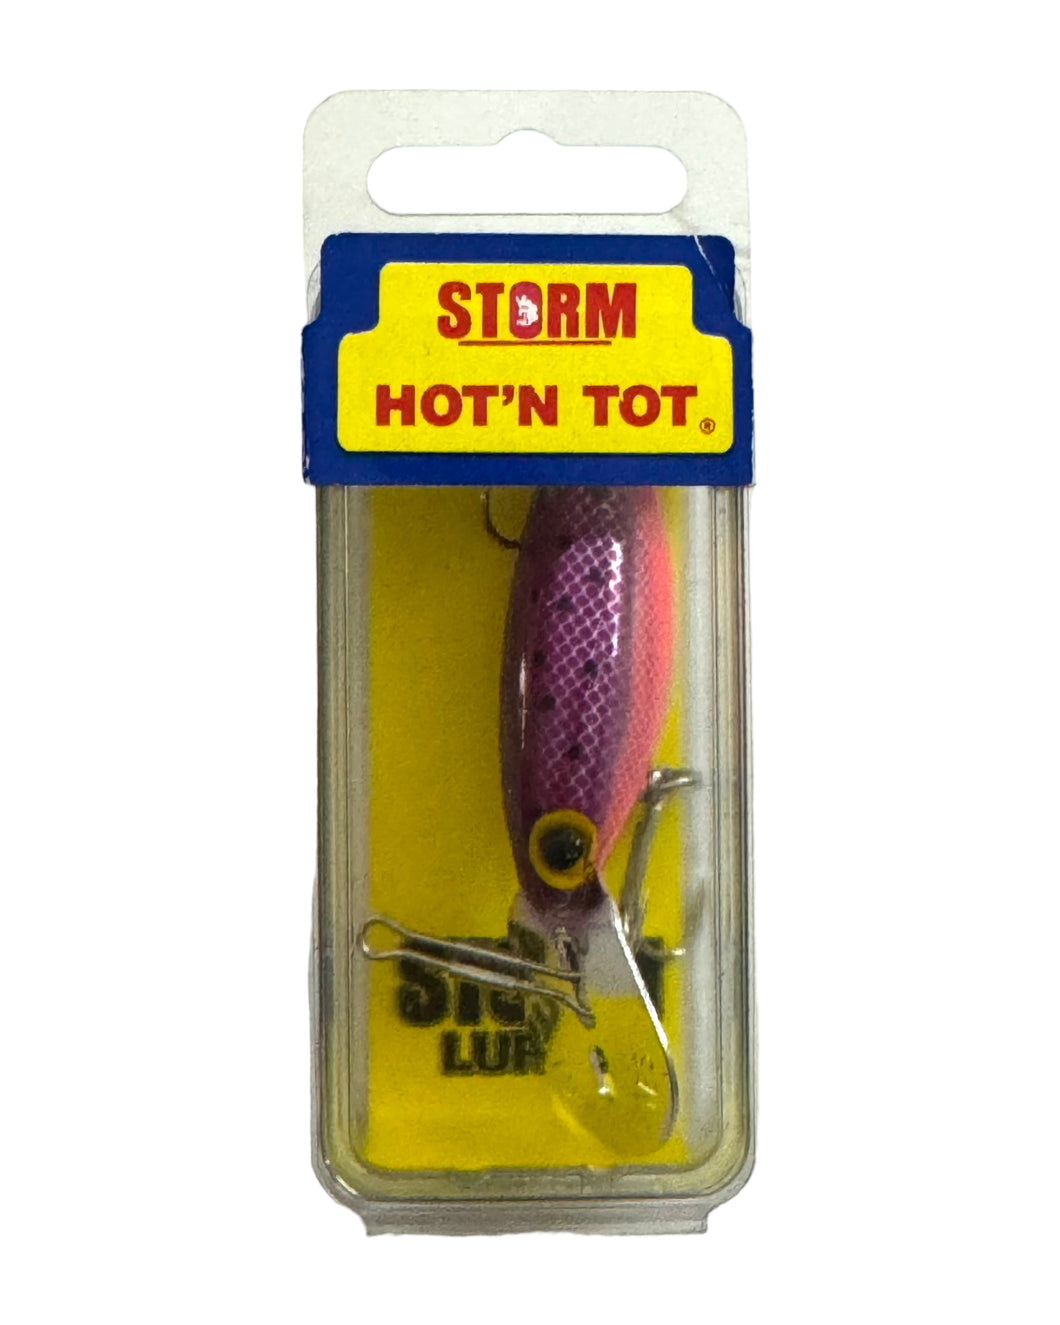 Front View of STORM LURES HOT N TOT Fishing Lure in METALLIC PURPLE/RED/SPECKS aka Barney Rubble